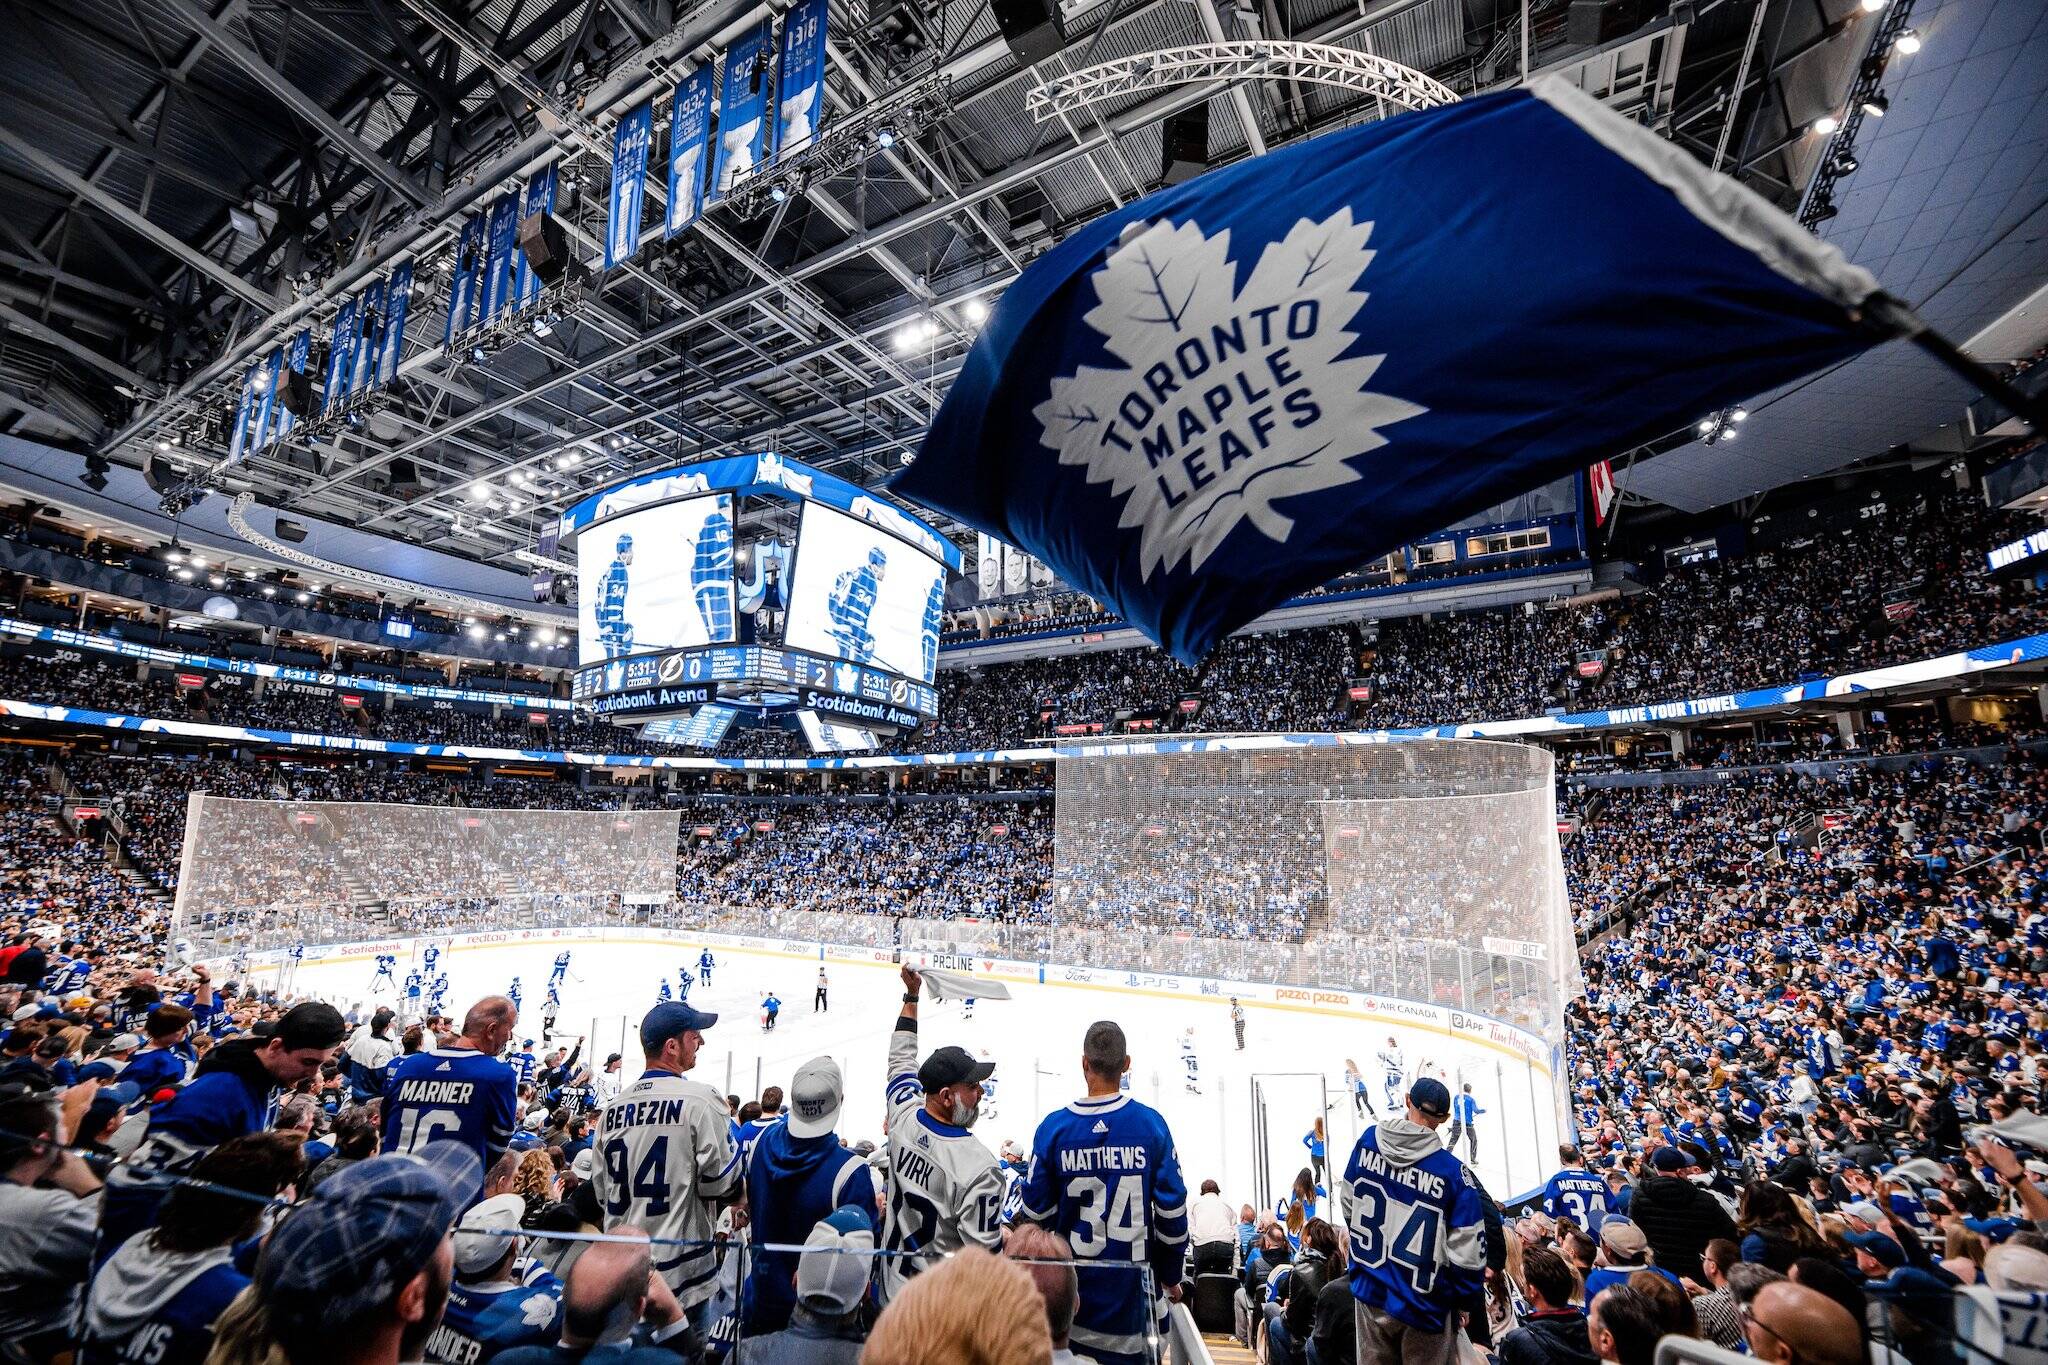 Here's how much it costs to see a Leafs vs Panthers playoff game in Toronto